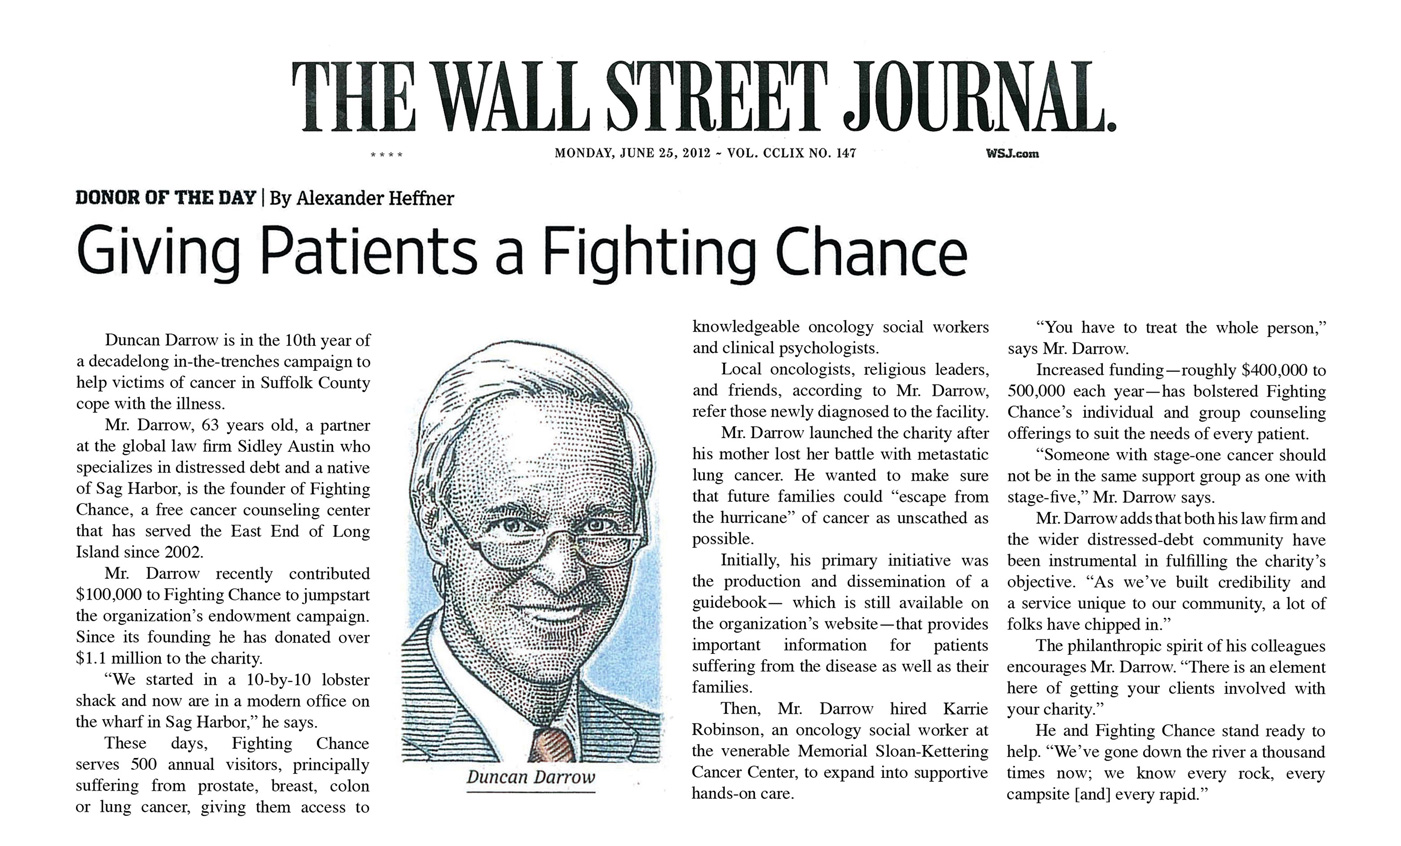 Wall Street Journal article about the founder of Fighting Chance